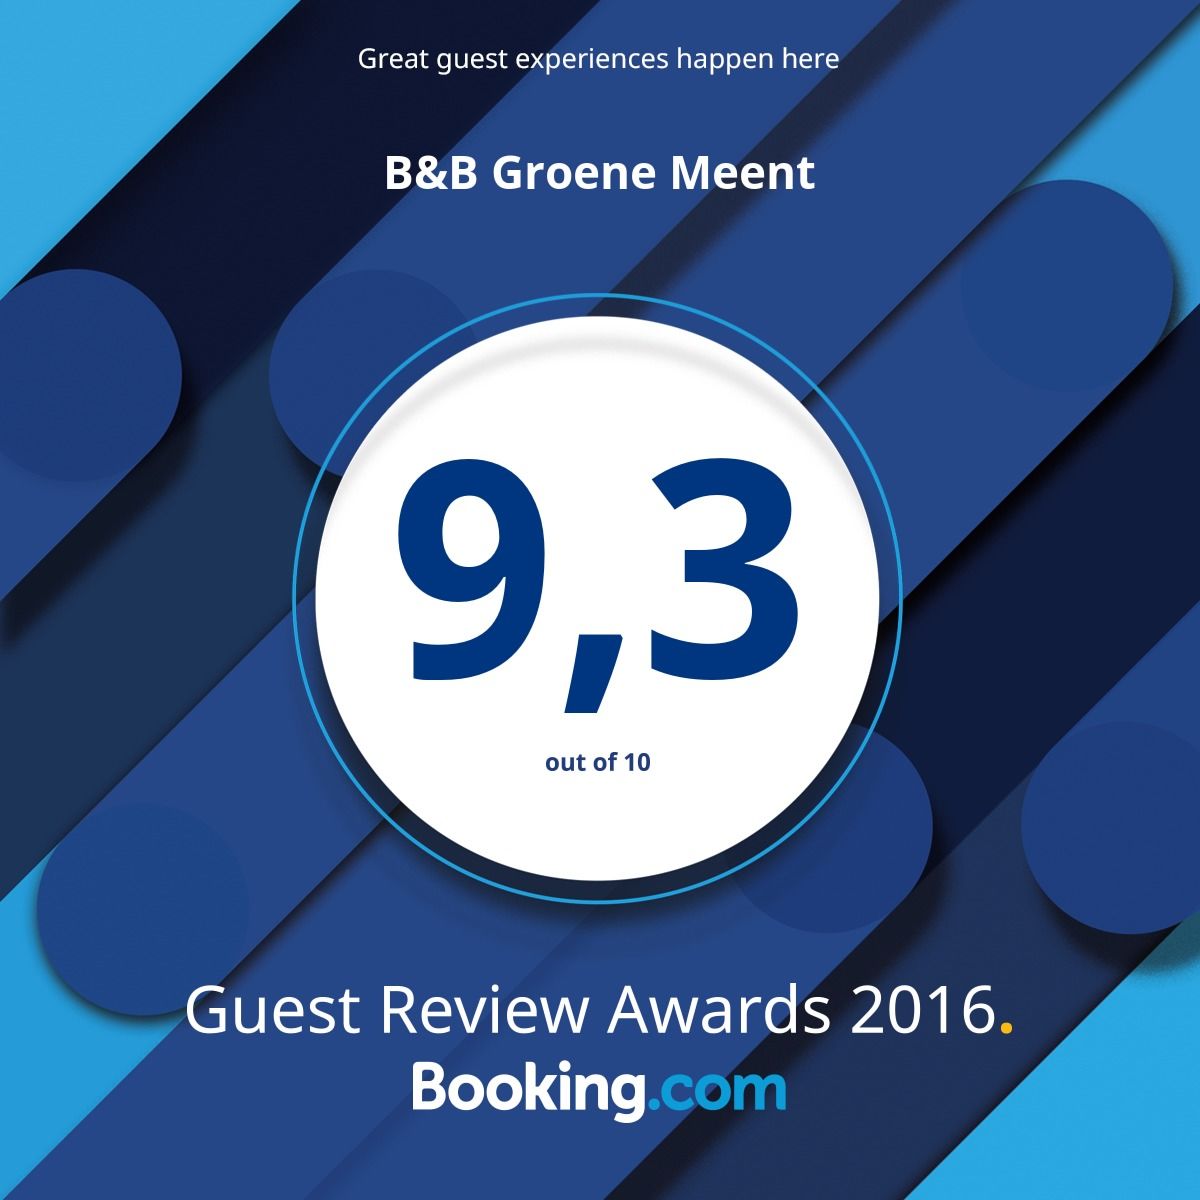 Booking.com Guest Review Award 2016